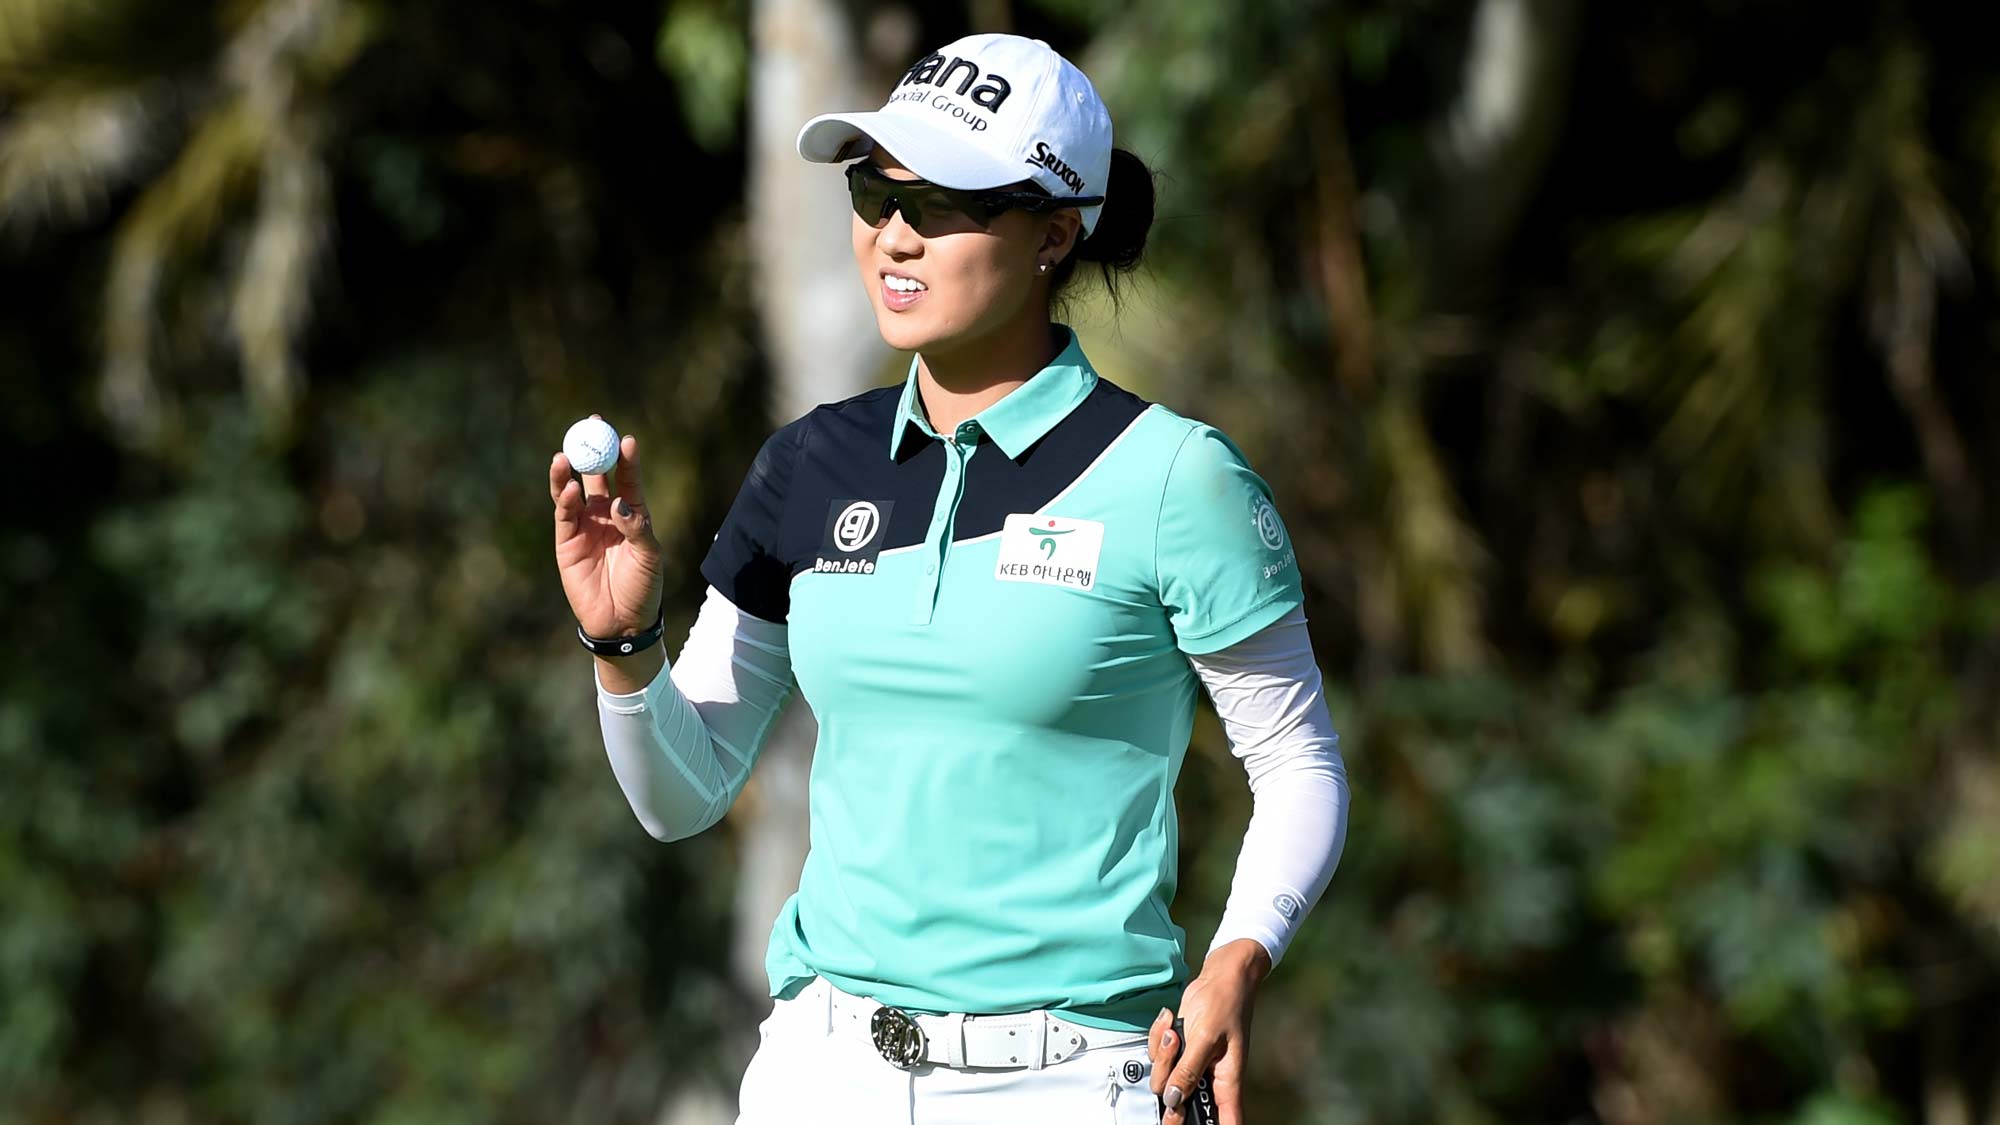 Minjee Lee of Australia acknowledges the gallery after sinking a putt on the 15th hole during the second round of the Kia Classic